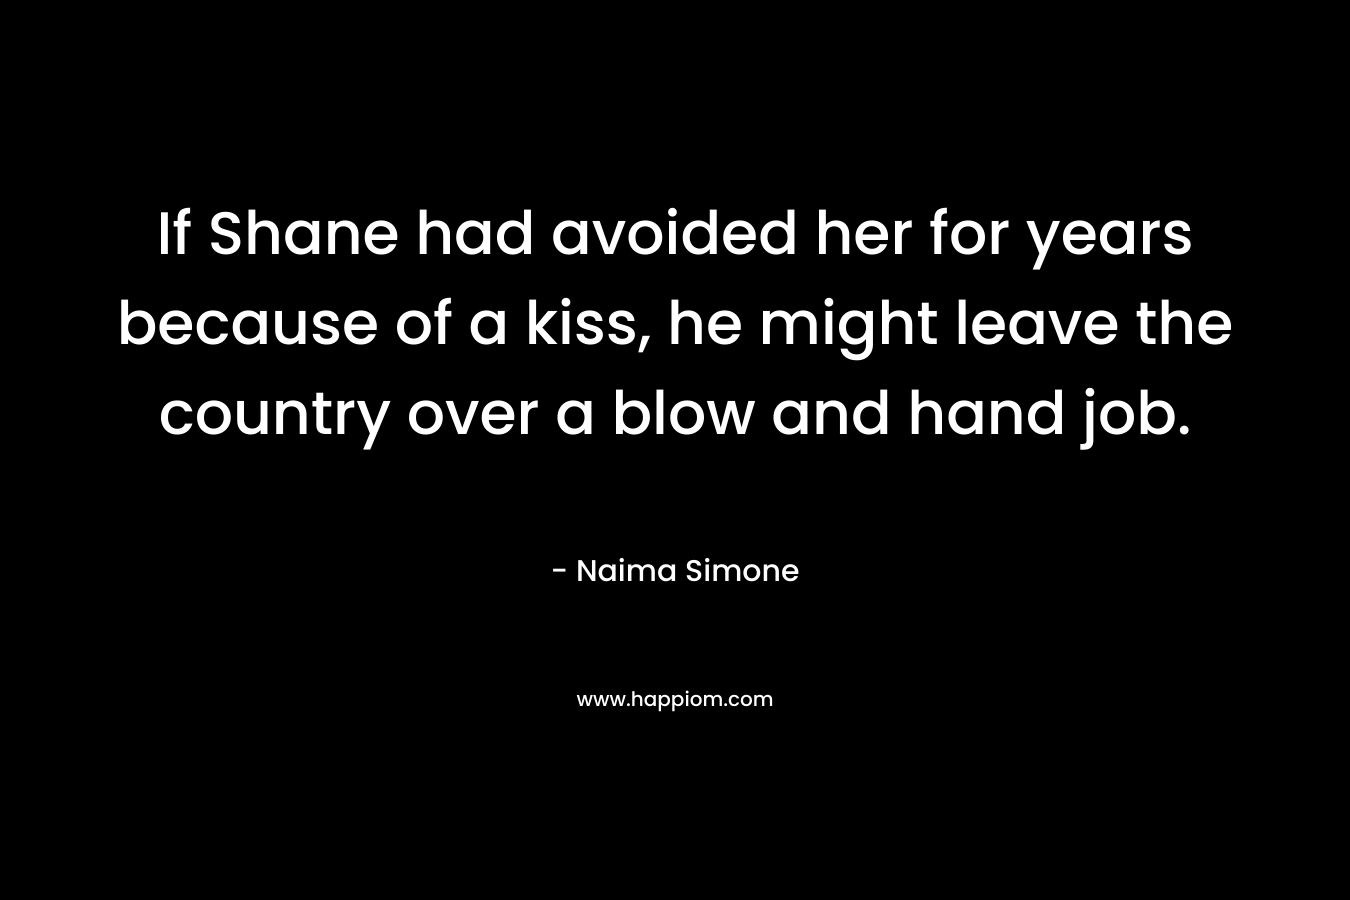 If Shane had avoided her for years because of a kiss, he might leave the country over a blow and hand job. – Naima Simone